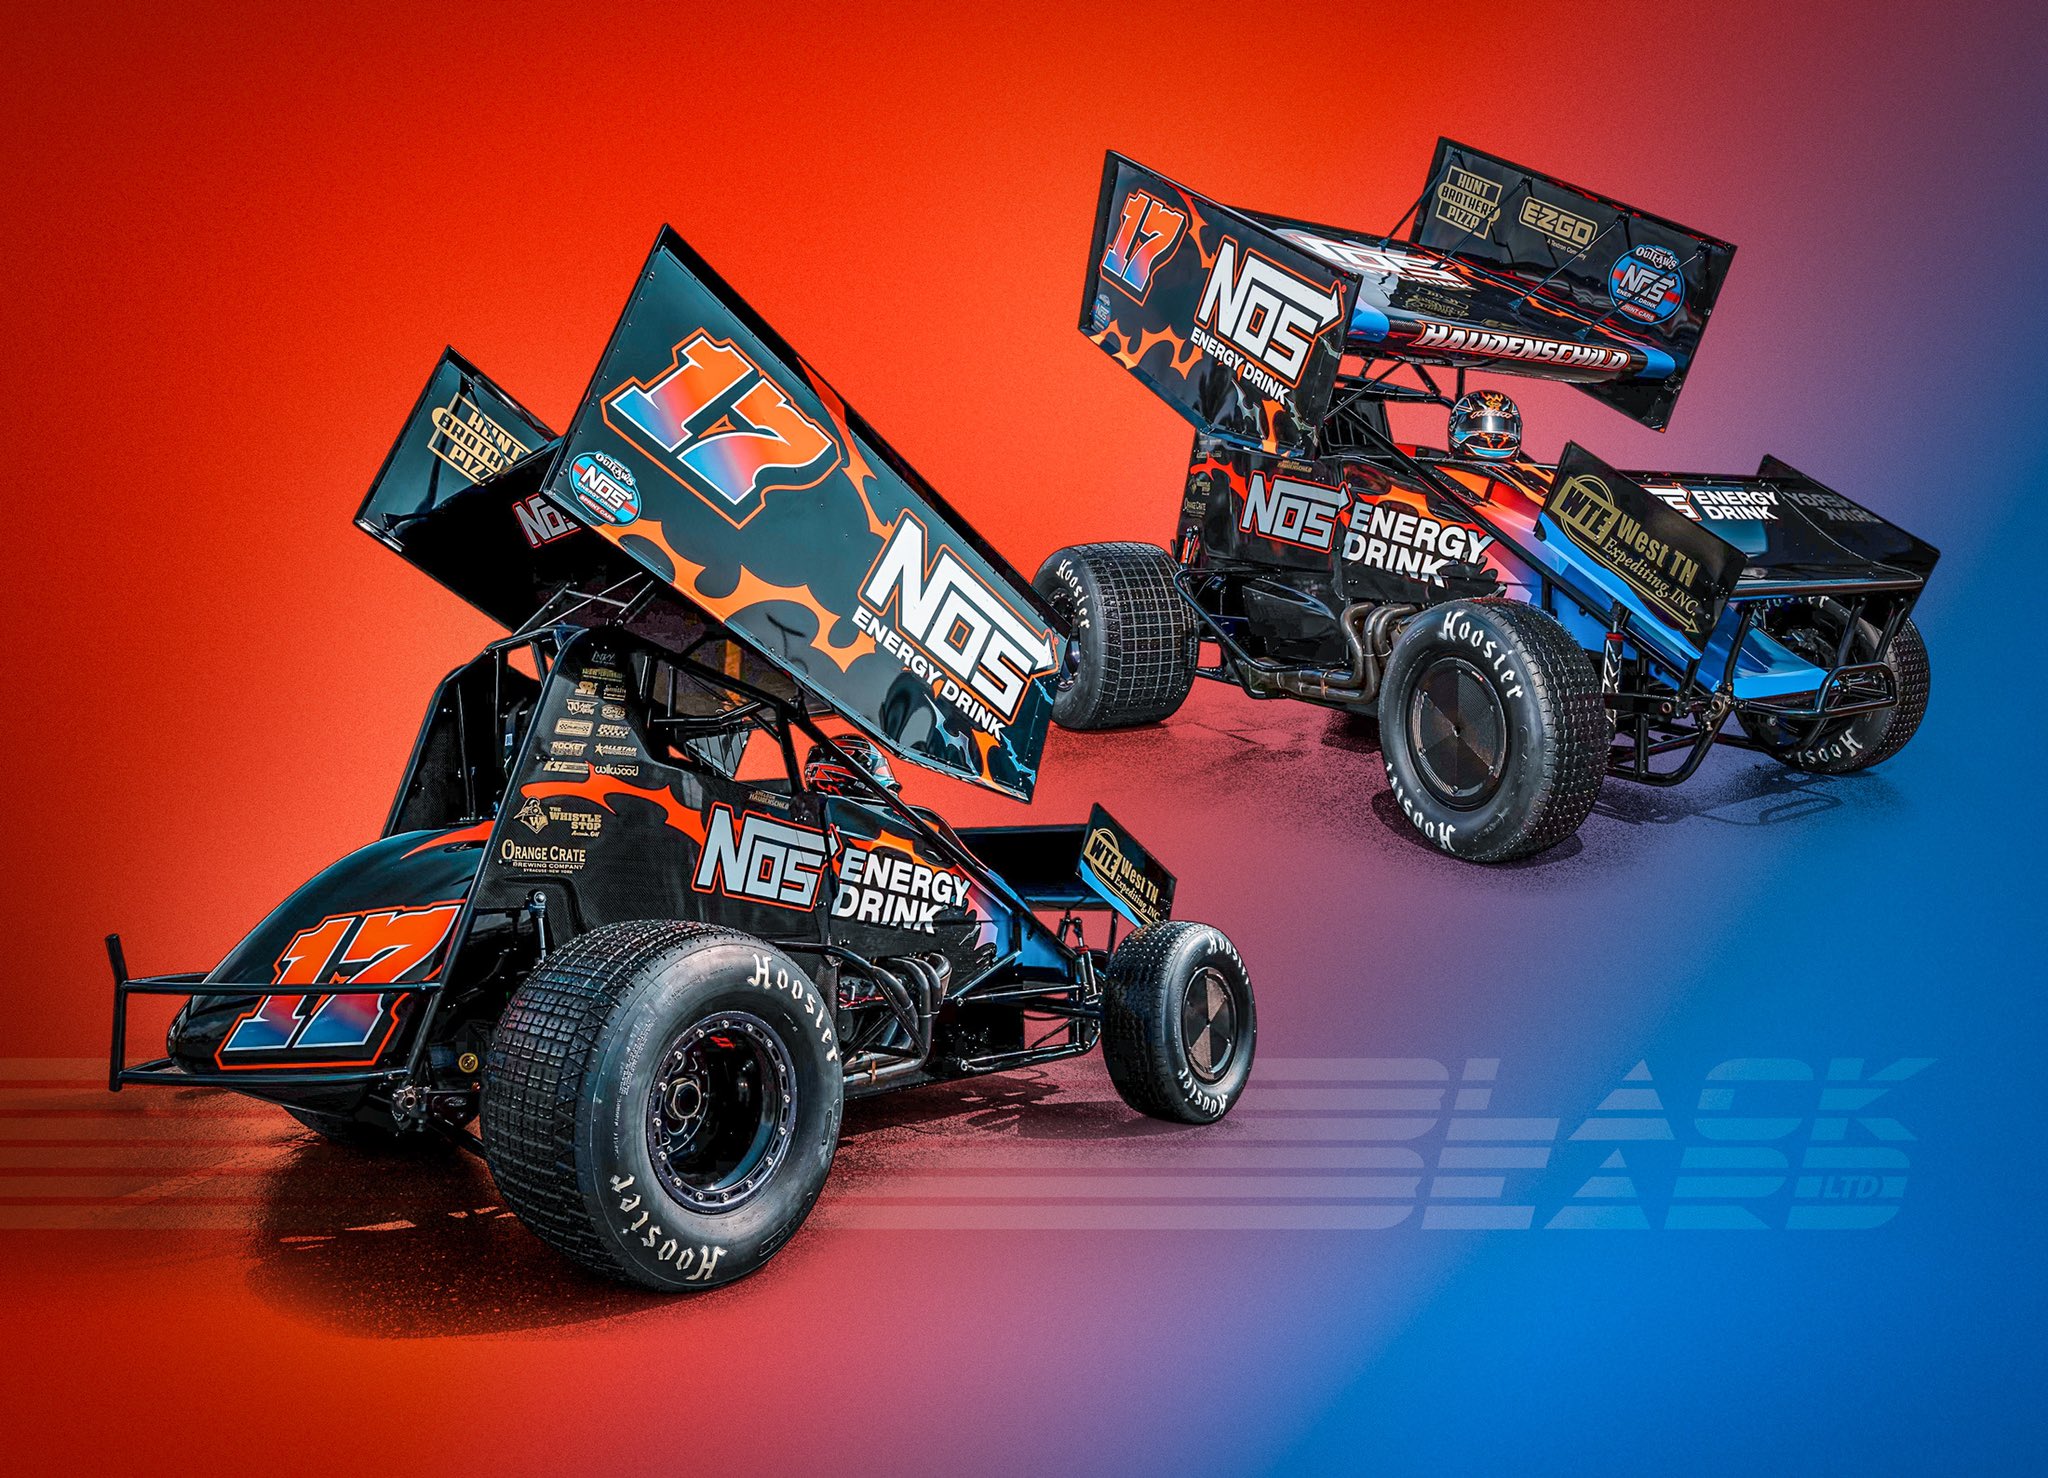 MAKING WAVES Sheldon Haudenschild eyes repeat victory at Cedar Lake   World of Outlaws